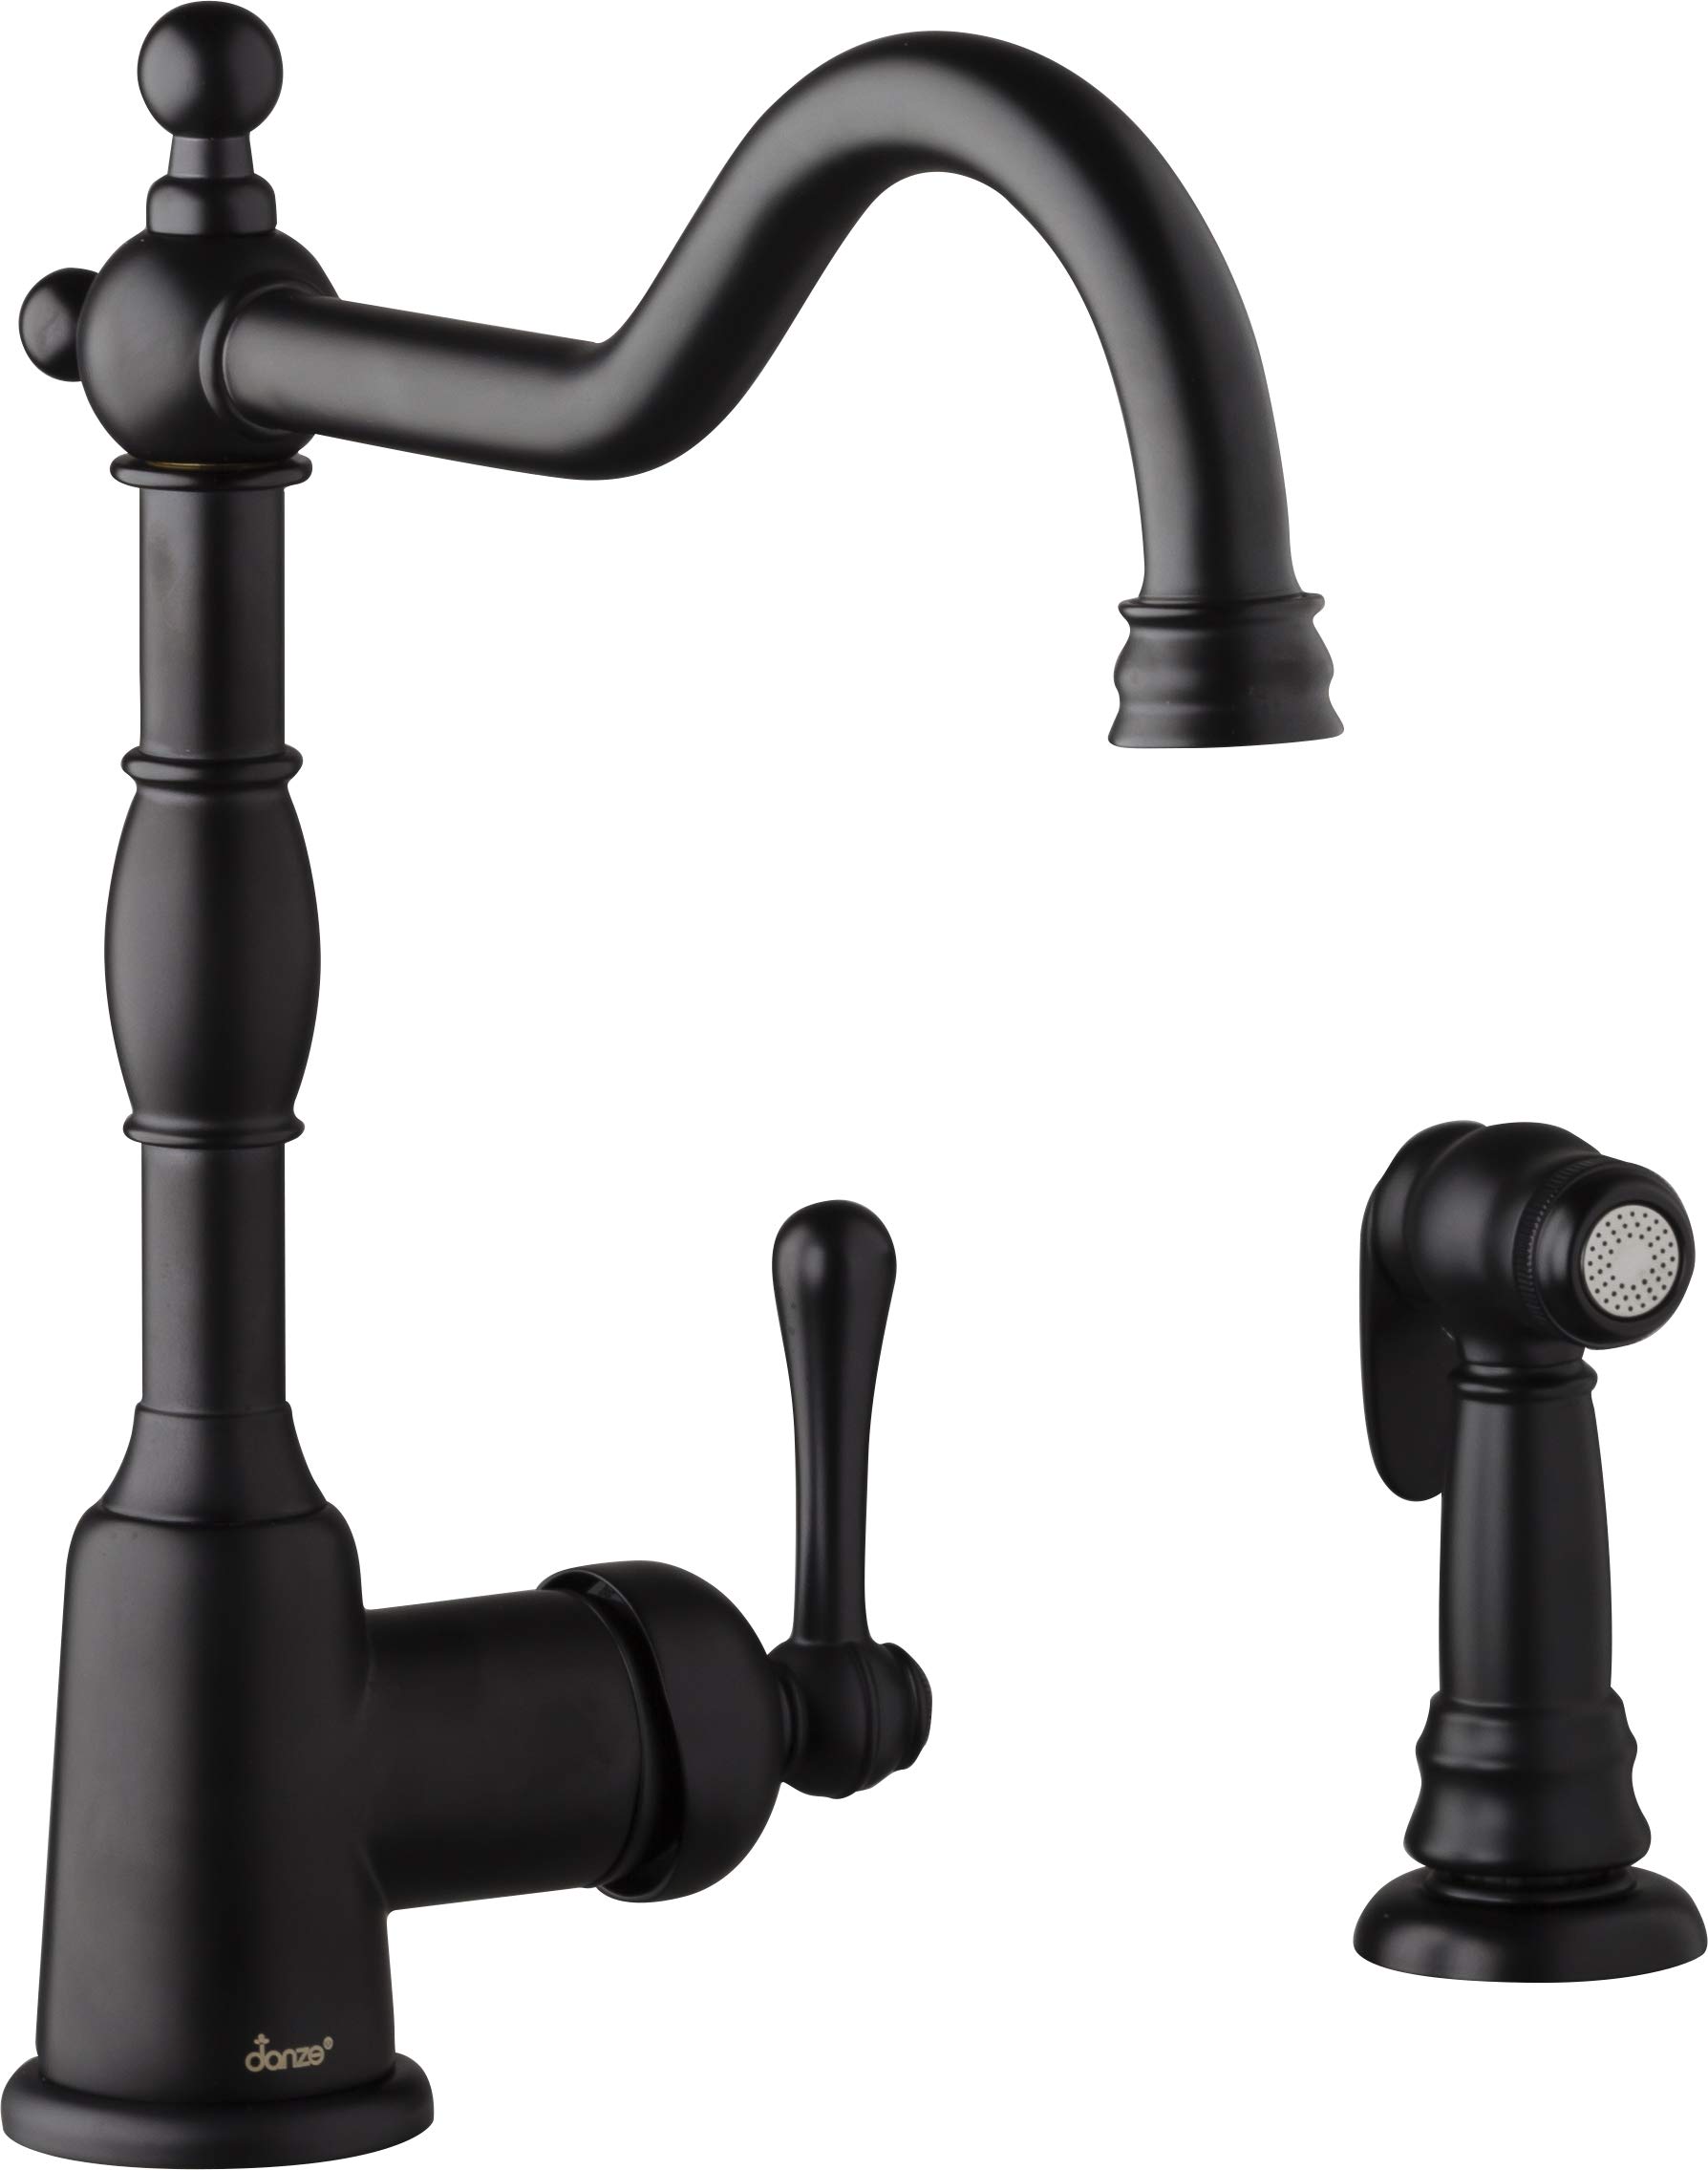 Danze D401157BS Opulence Single Handle Kitchen Faucet with Side Spray, Satin Black